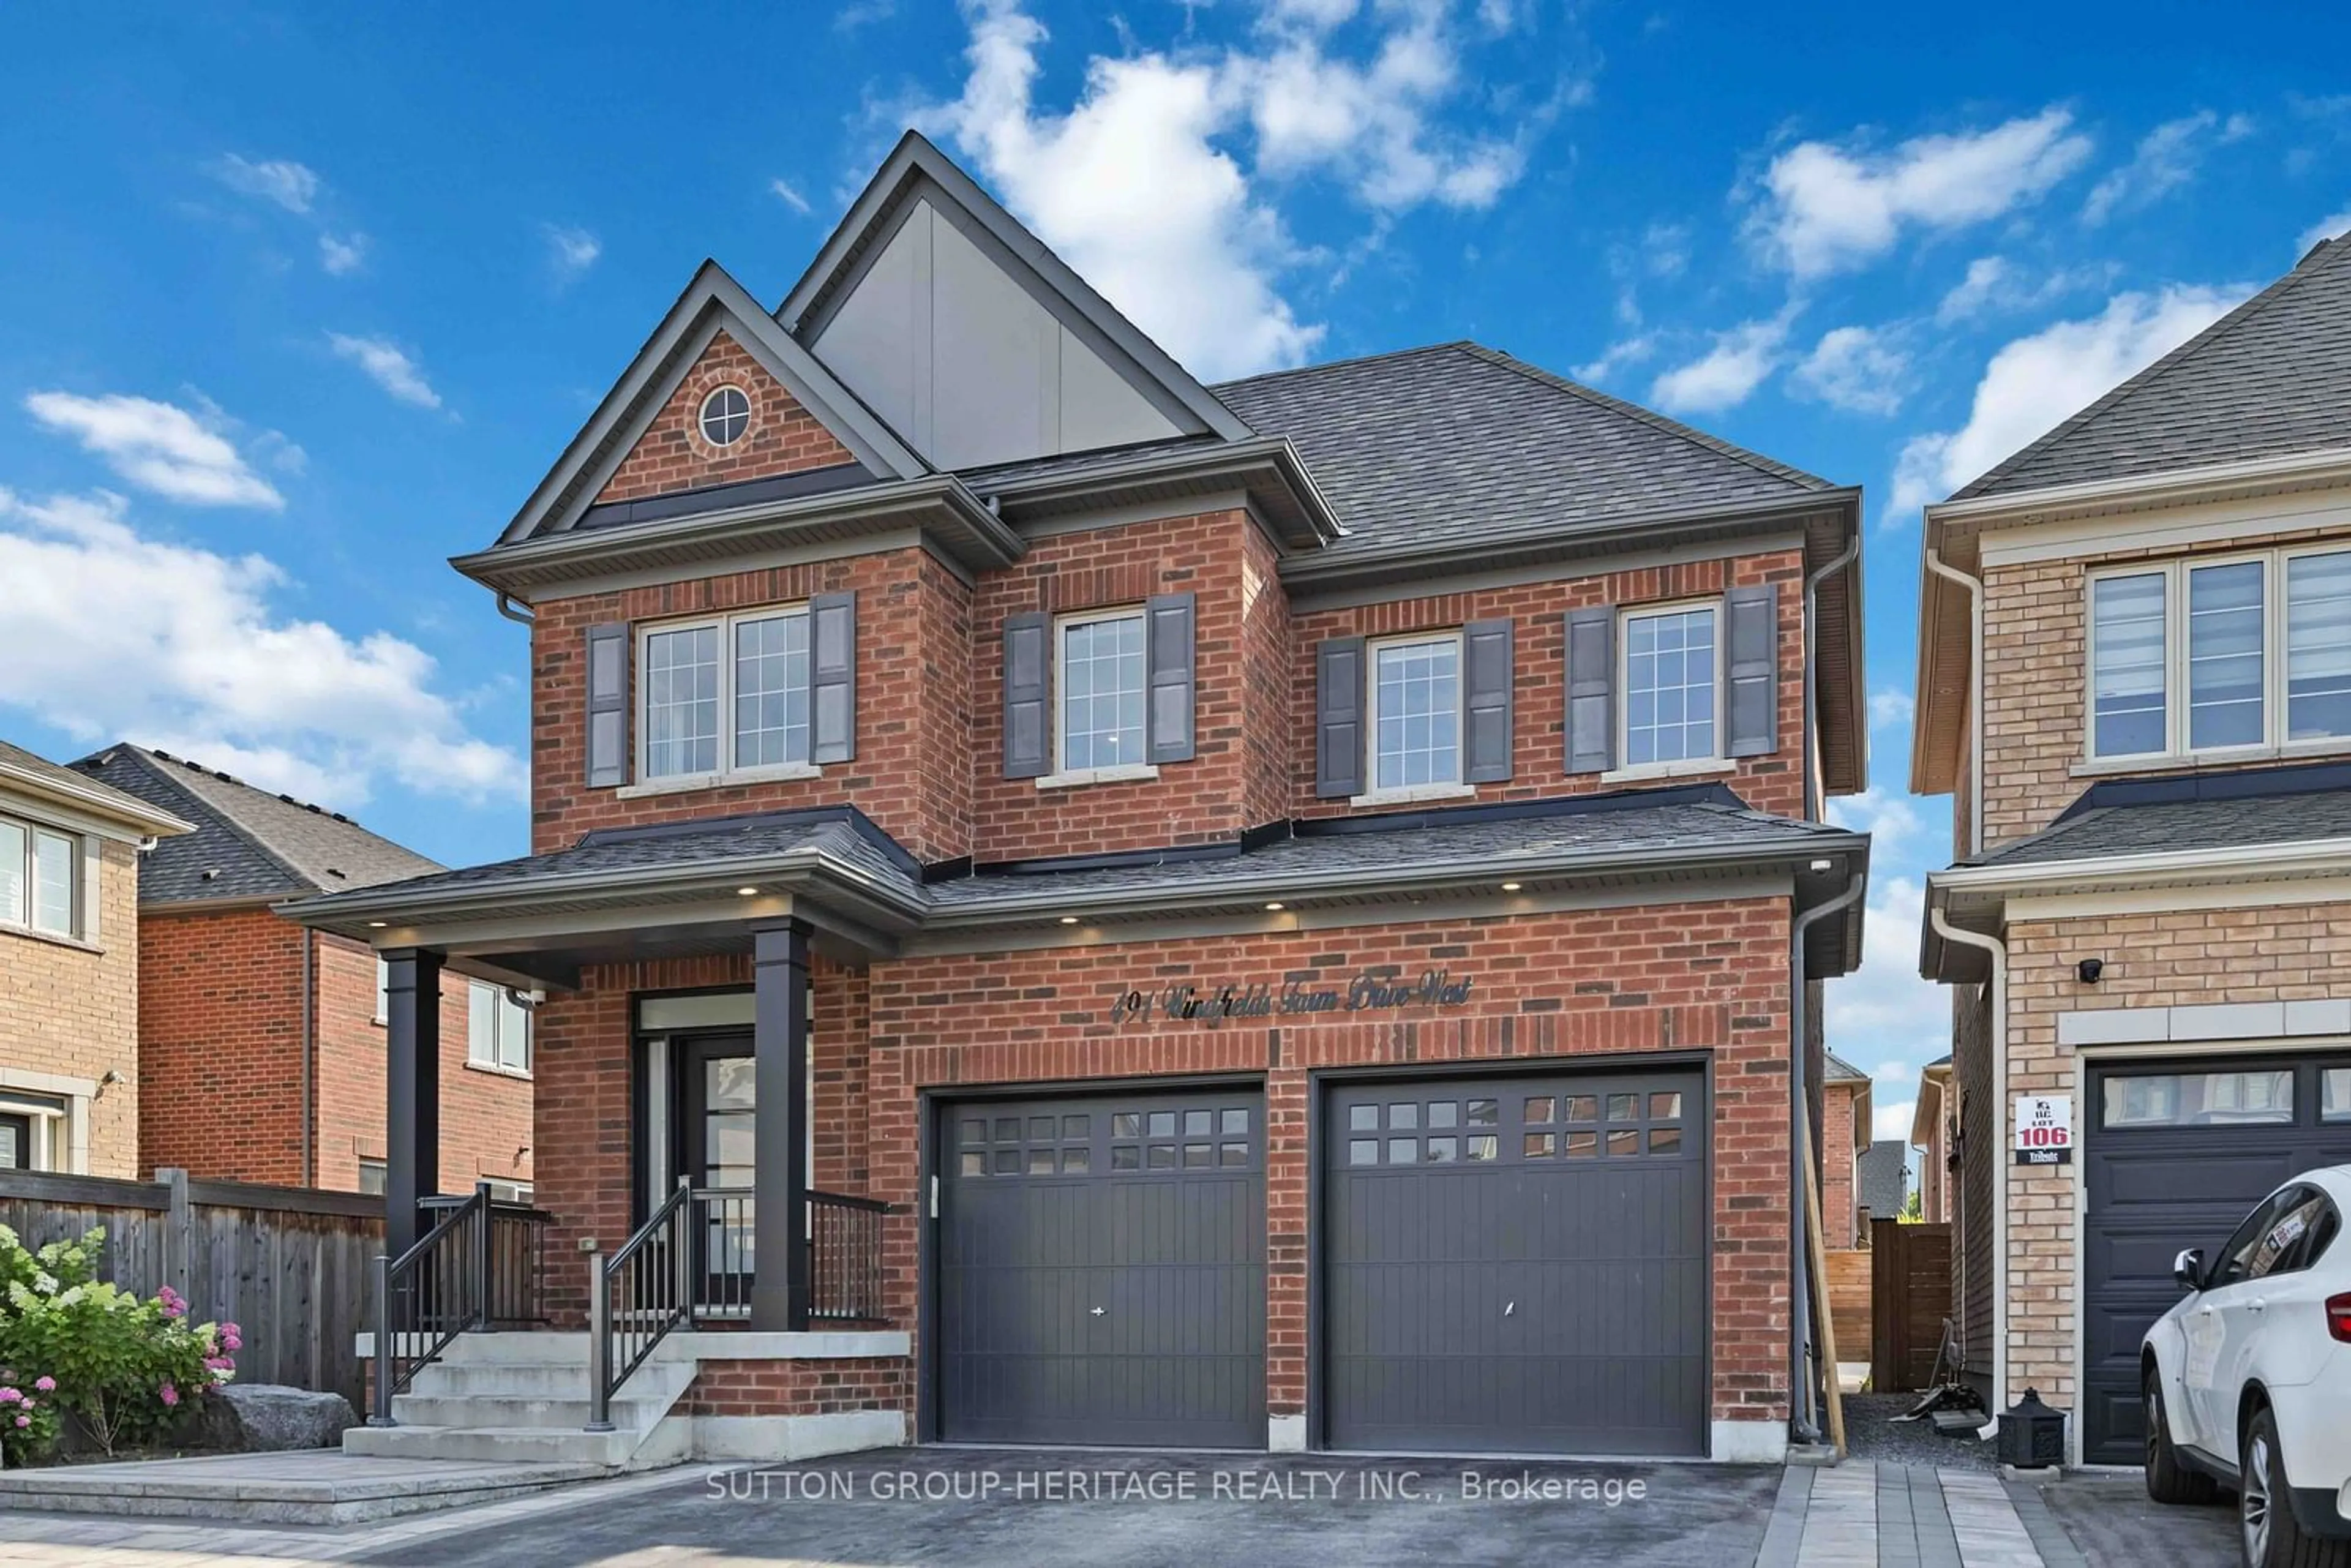 Home with brick exterior material for 491 Windfields Farm Dr, Oshawa Ontario L1H 7K4